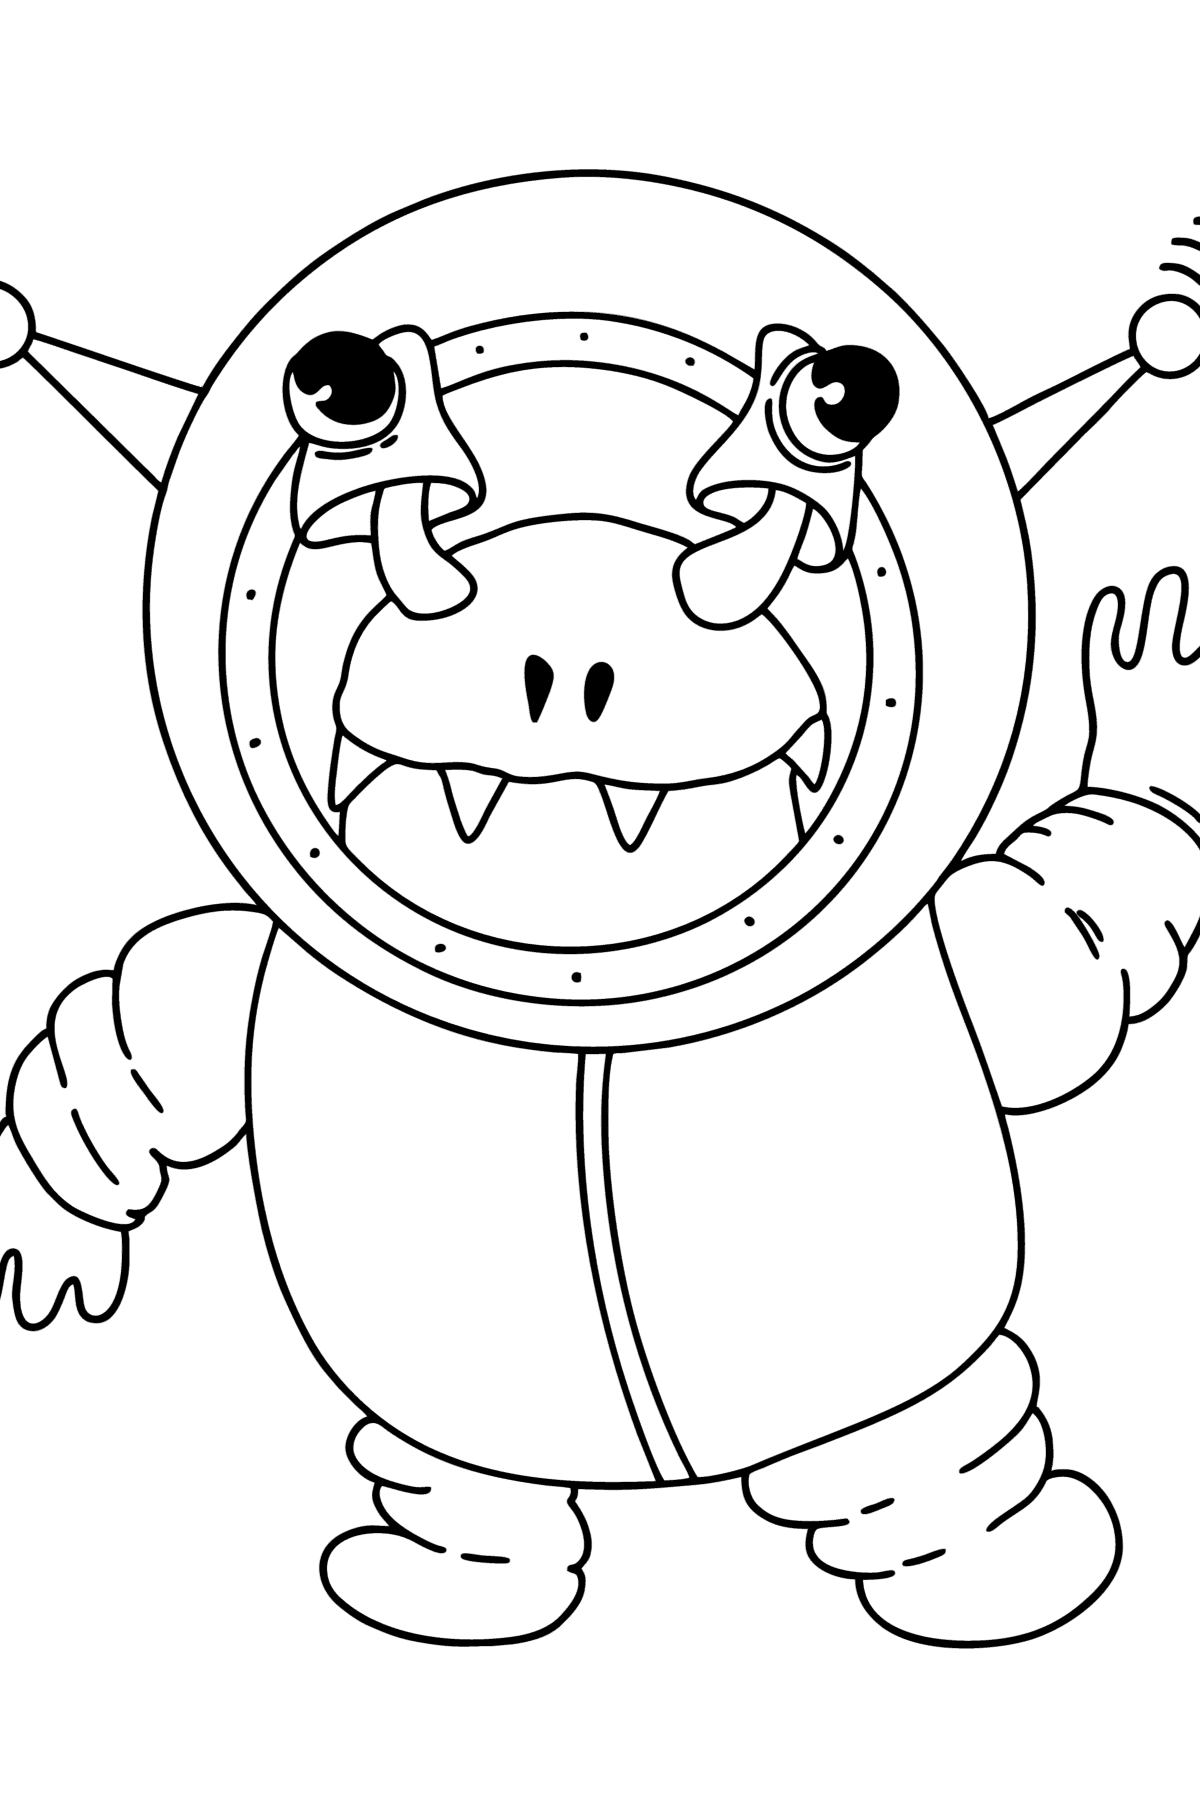 Coloring page alien in spacesuit - Coloring Pages for Kids